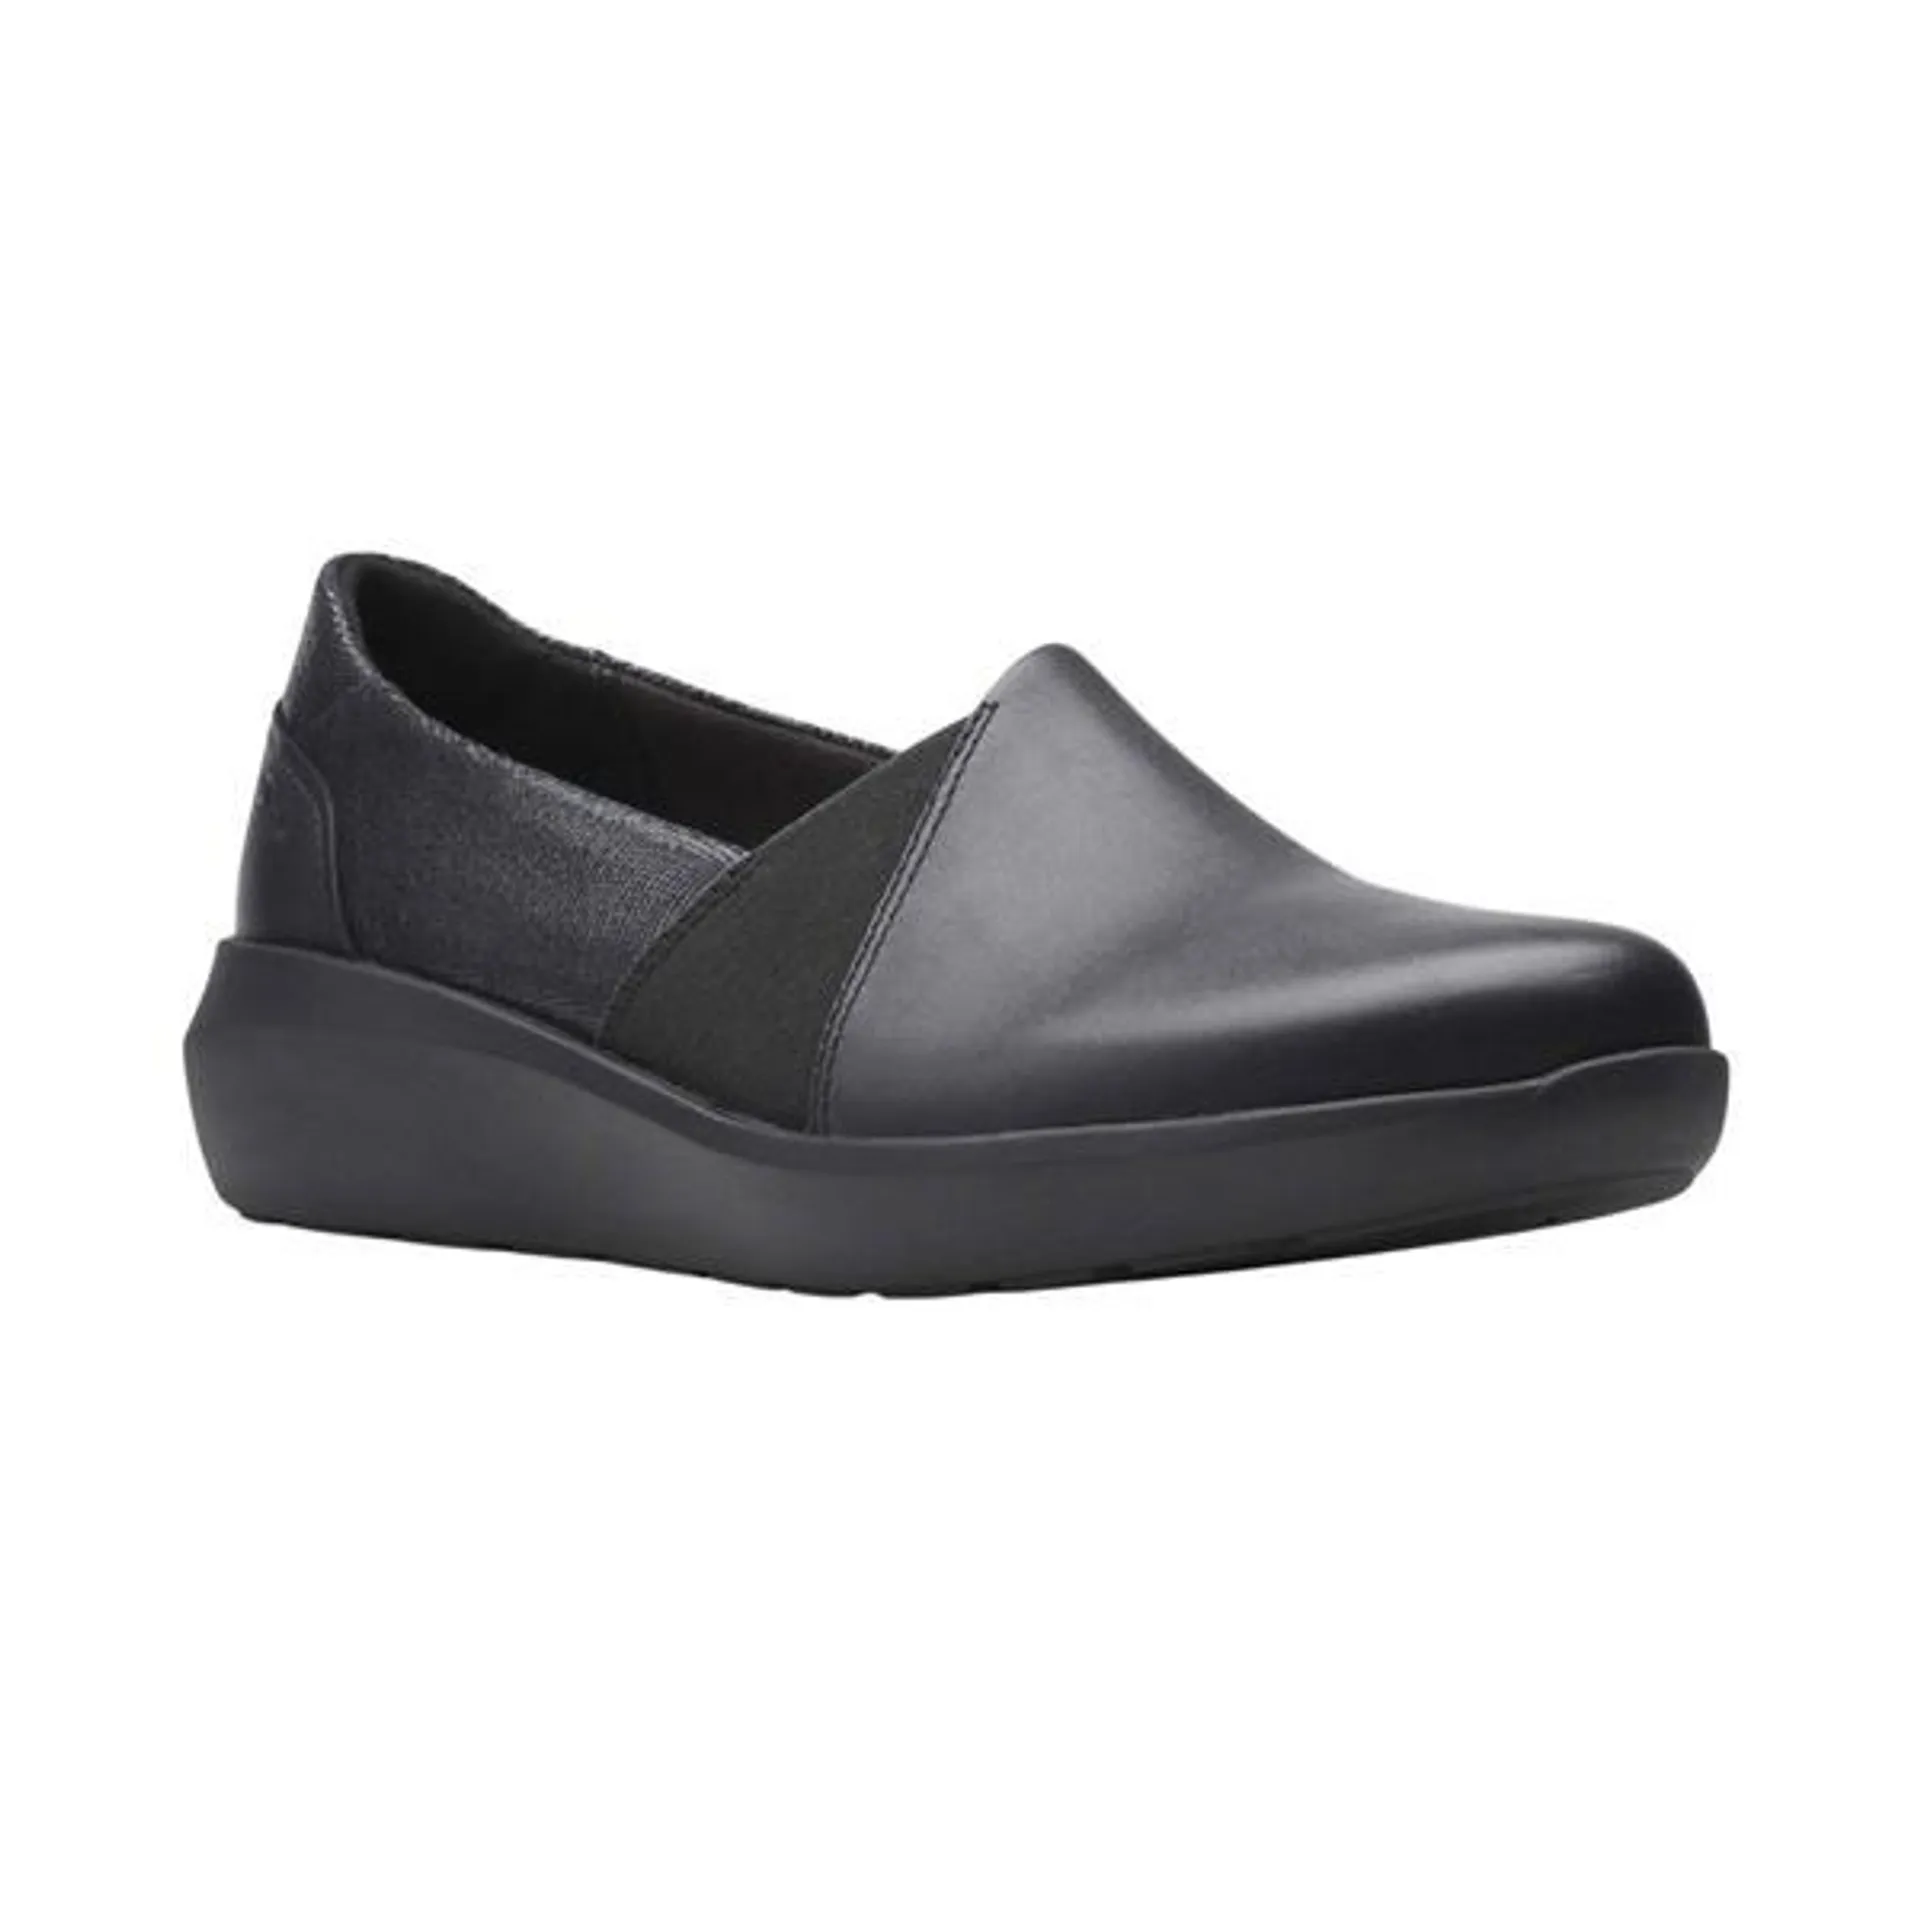 Women's Kayleight Step Shoes